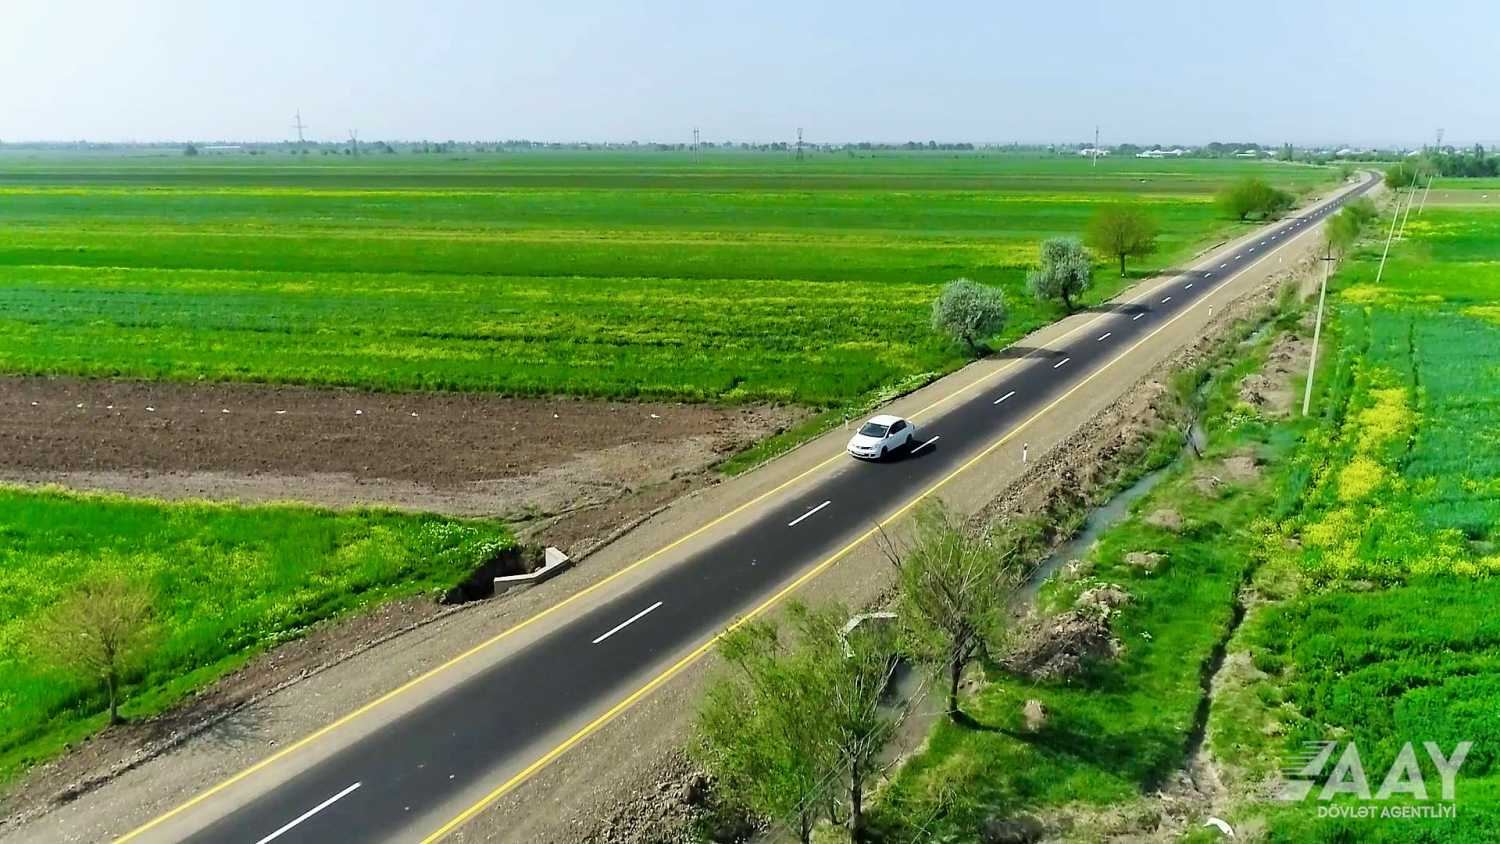 Azerbaijan commissions road connecting settlements in Goranboy (PHOTO/VIDEO)